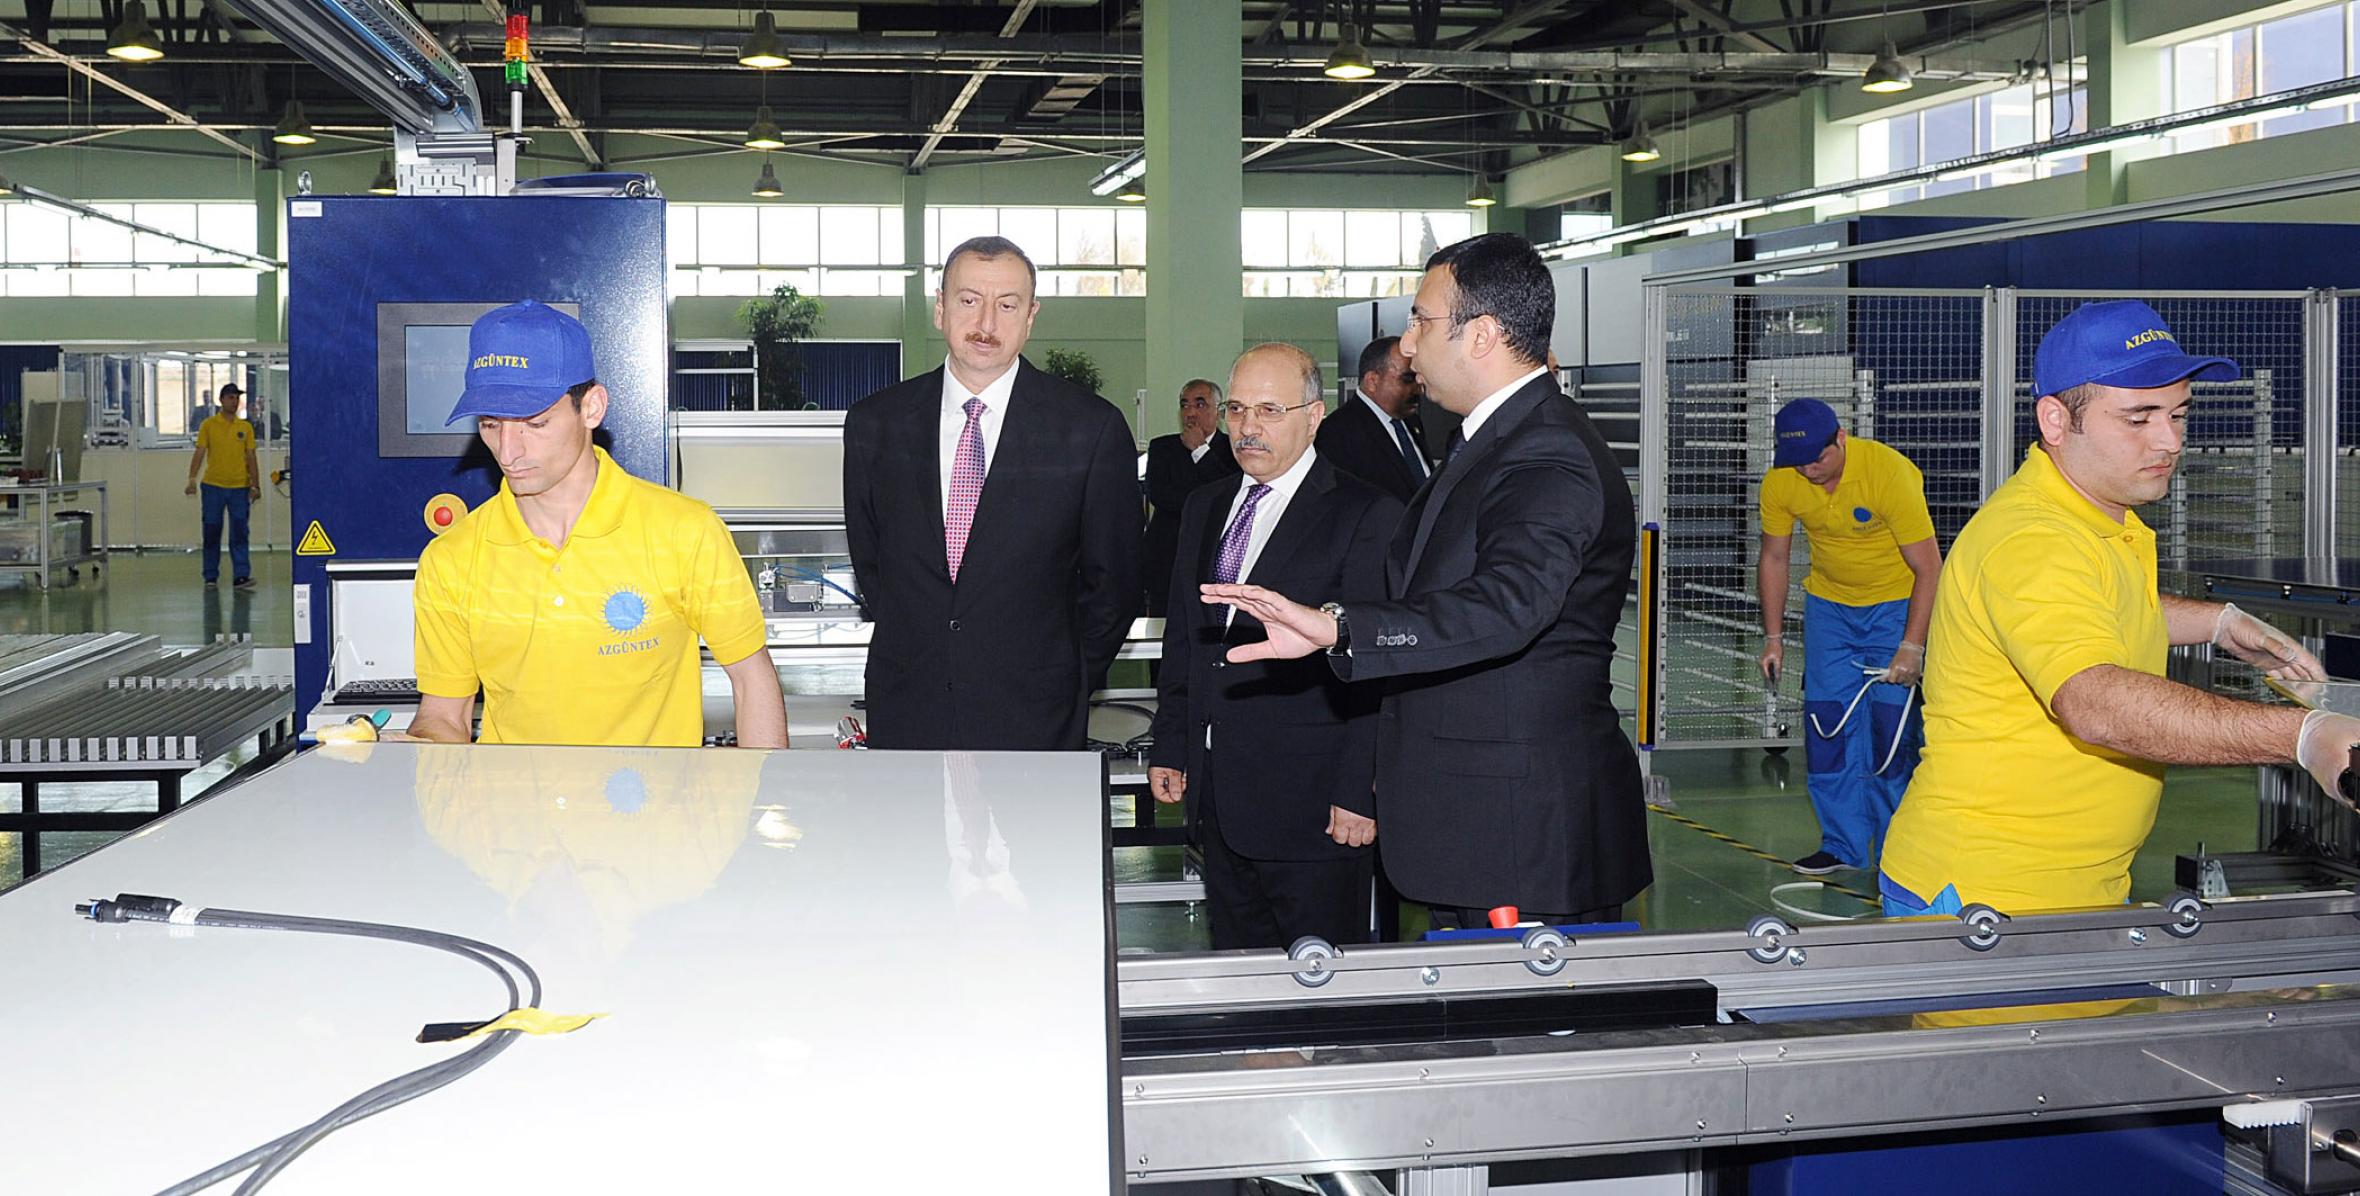 Ilham Aliyev attended the opening of the “Azguntech” plant in Sumgayit